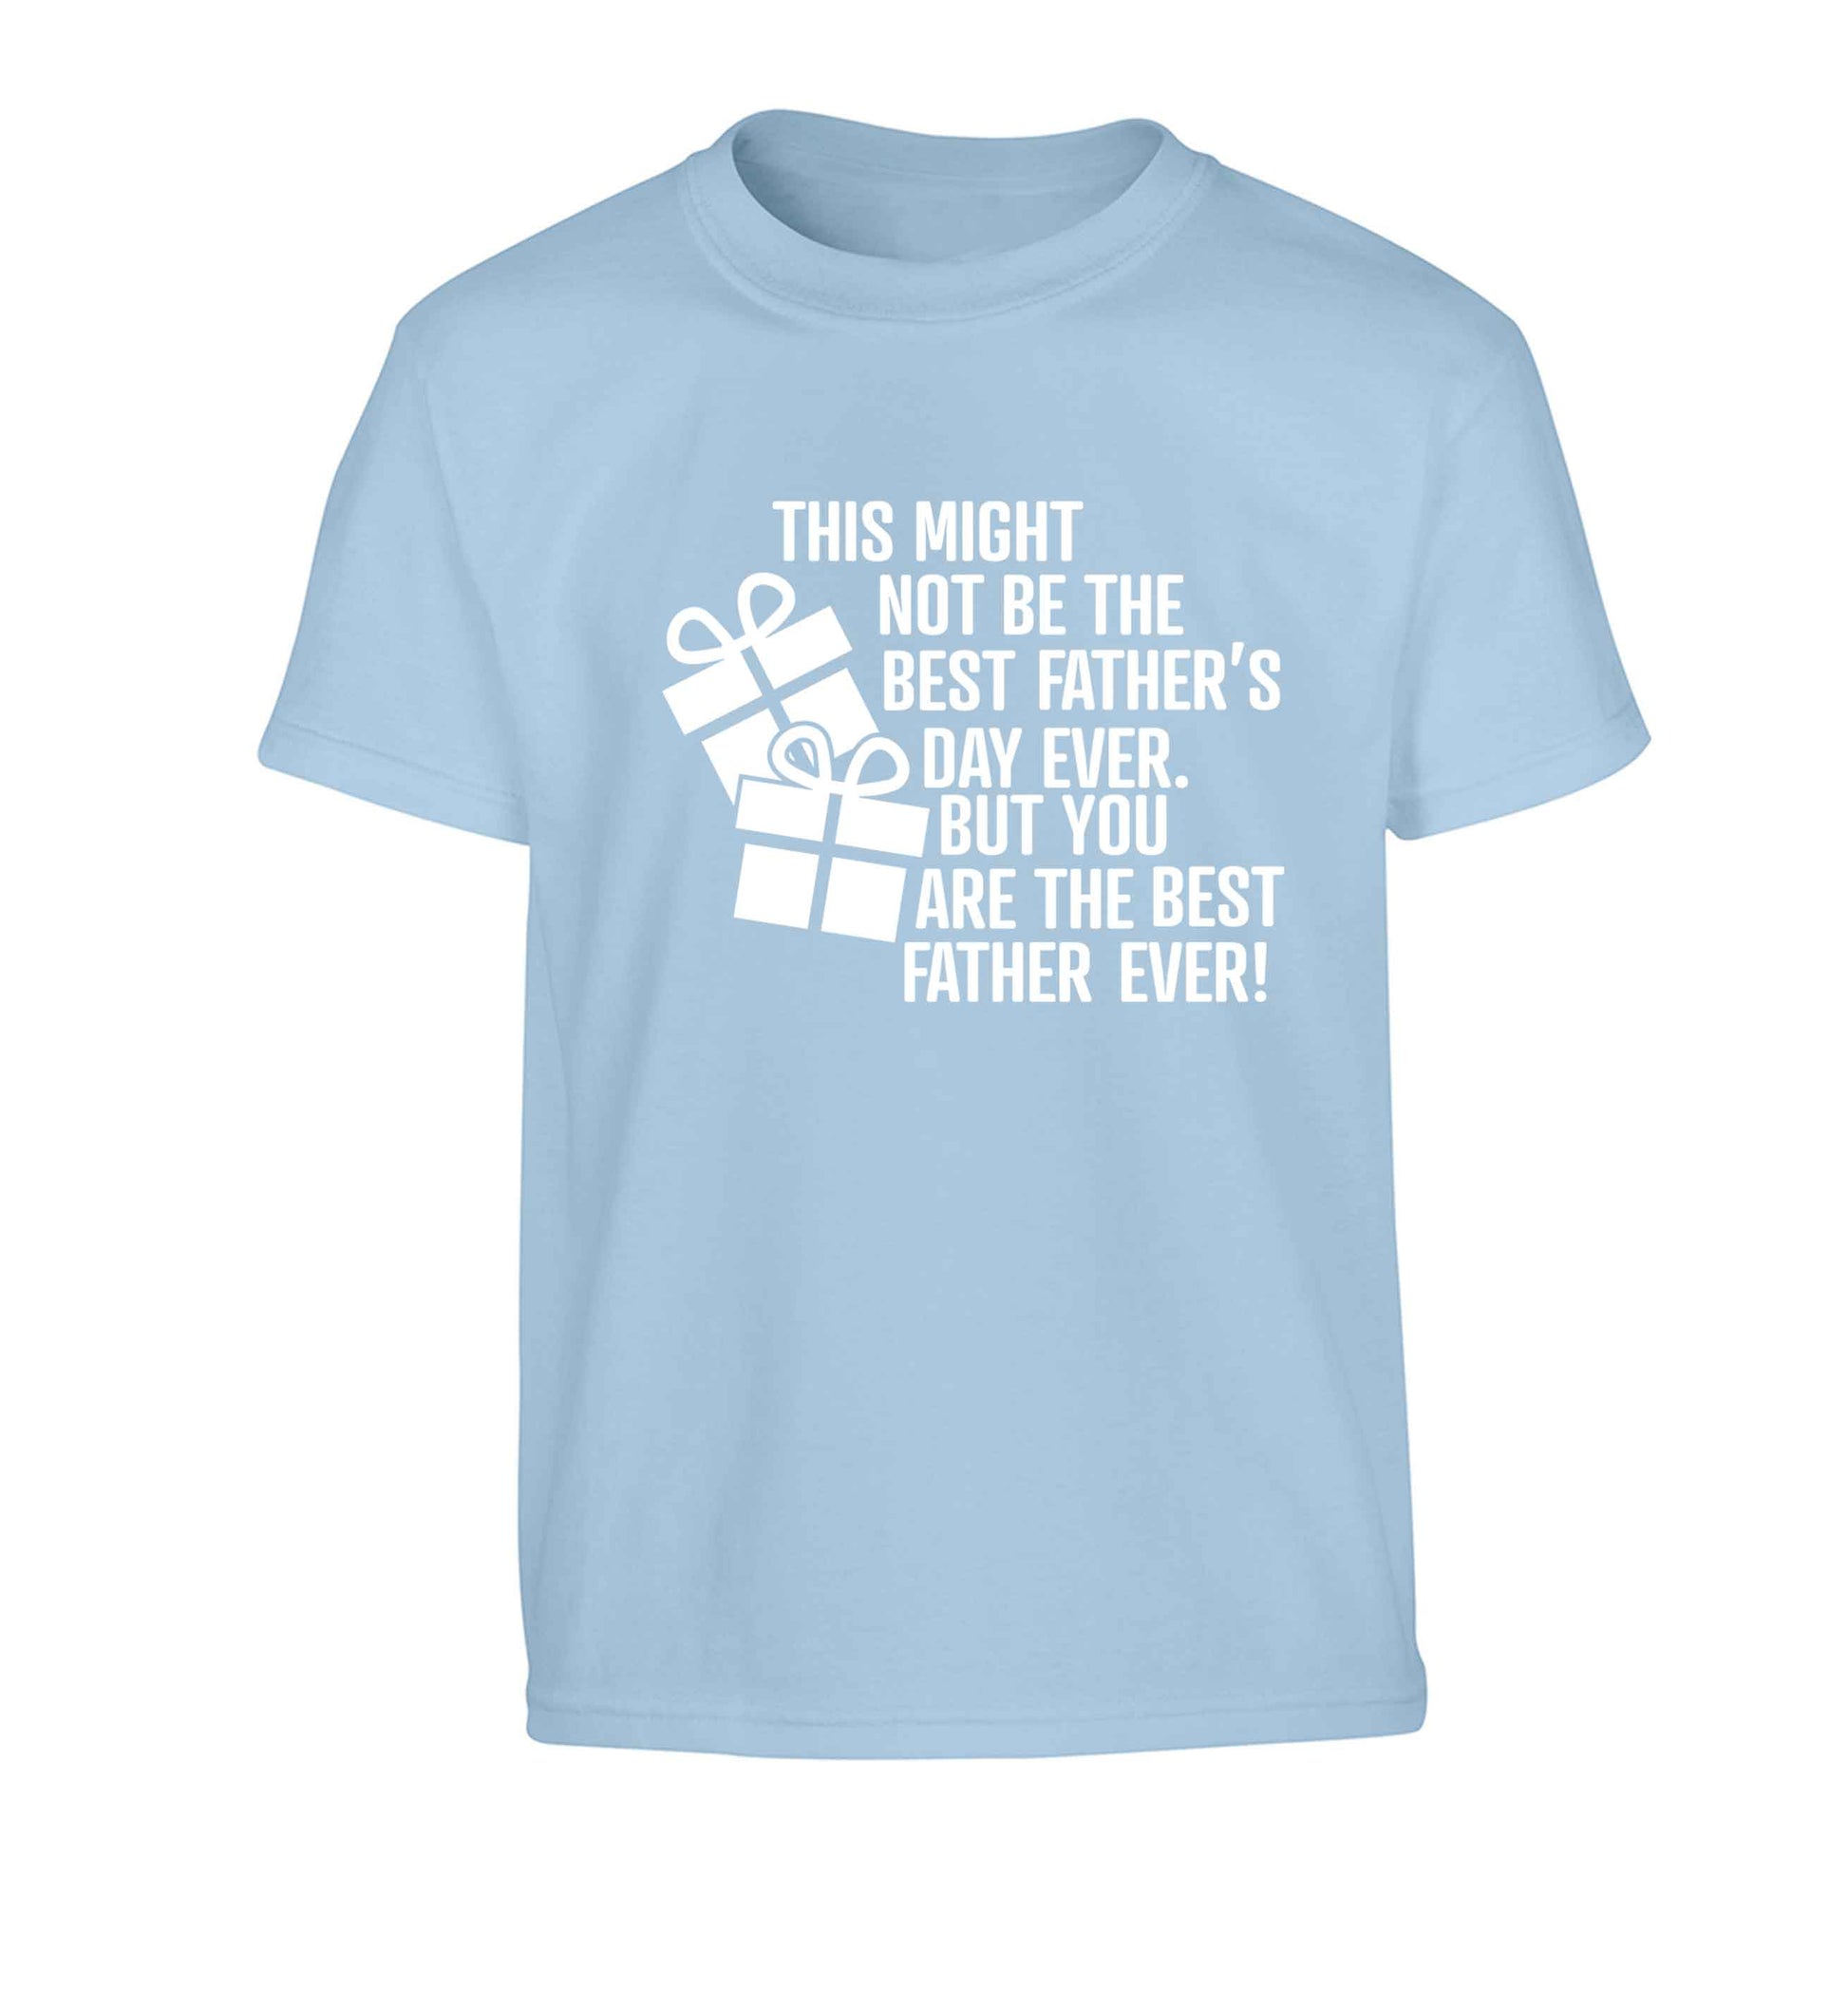 It might not be the best Father's Day ever but you are the best father ever! Children's light blue Tshirt 12-13 Years